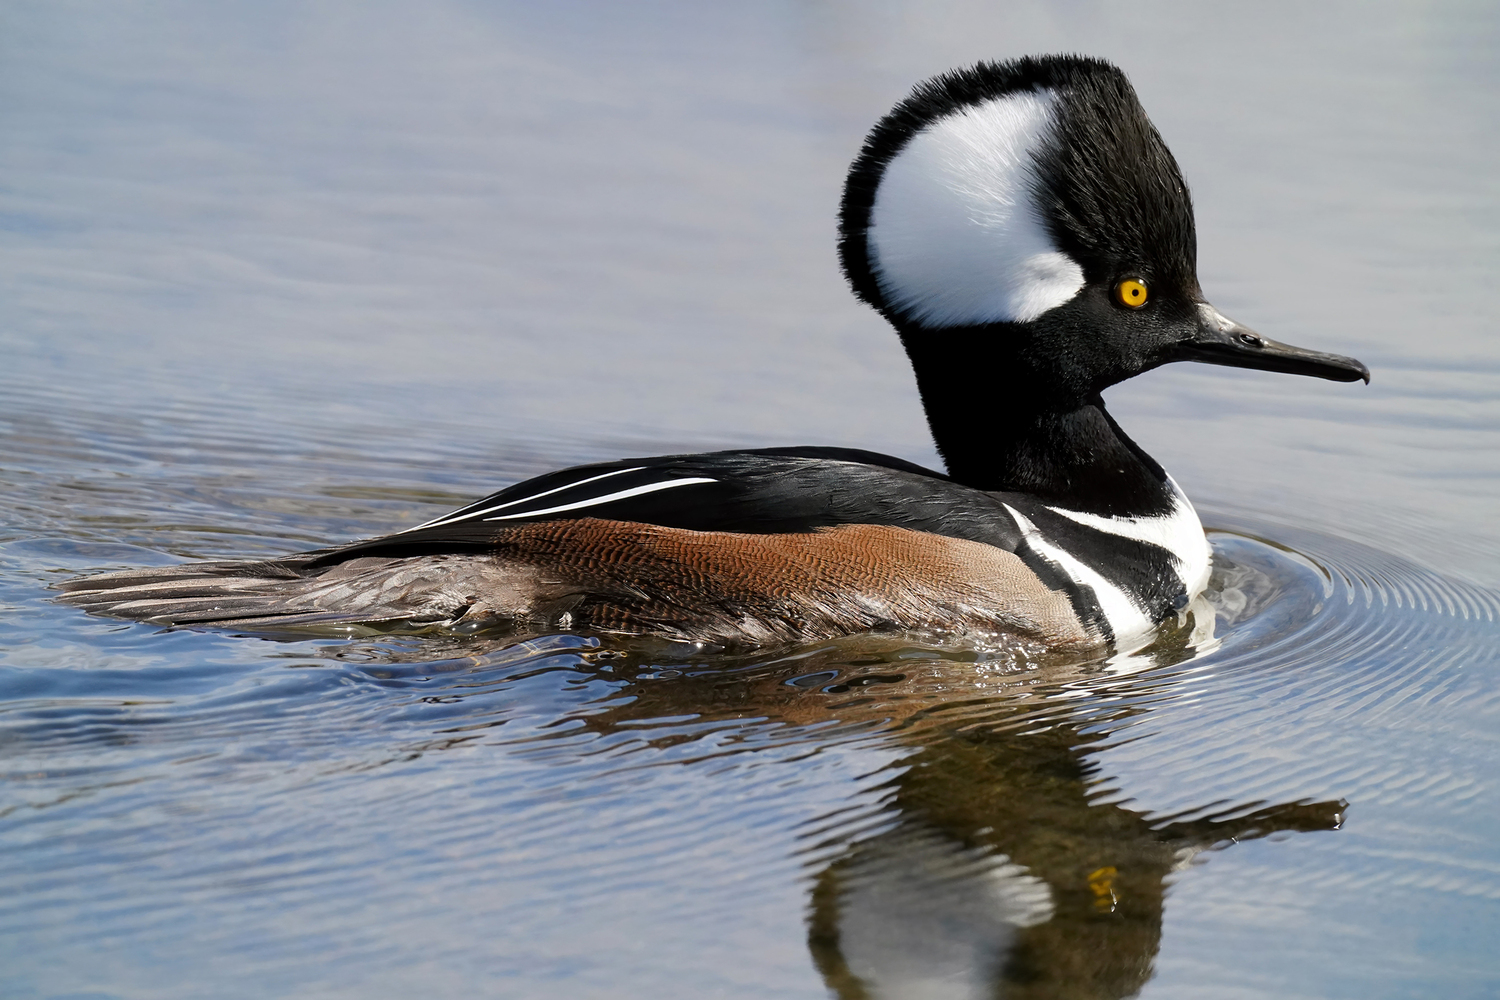 Though local waterfowl counts were low this season due to poor weather, hooded mergansers like this were seen.